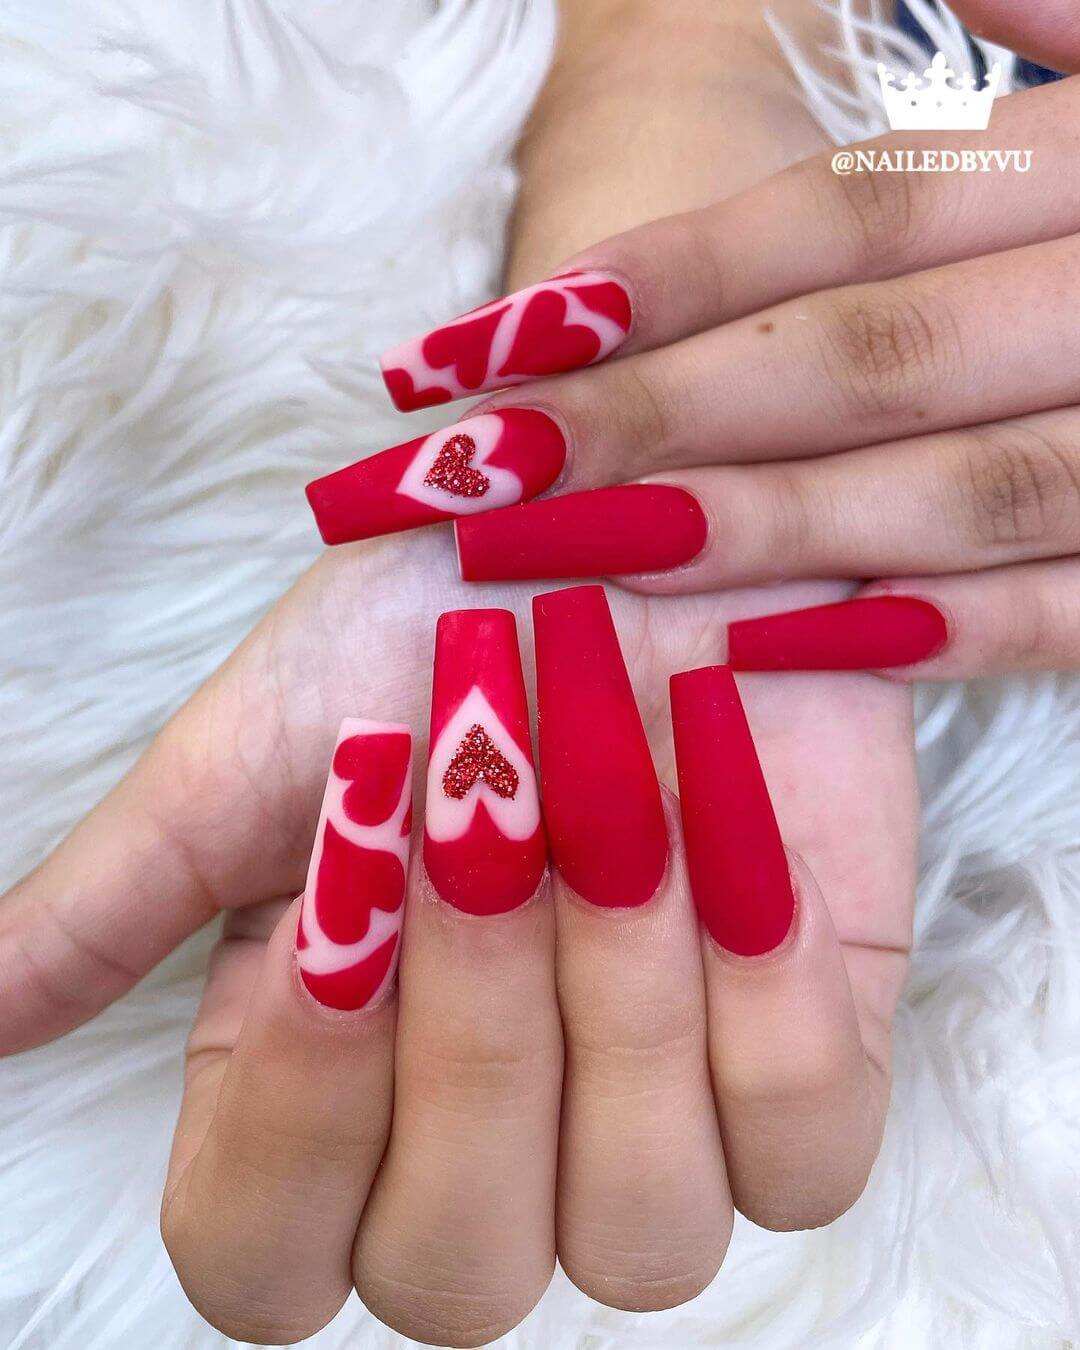 Heart Nail Art Designs for Valentine's Day - Colour that never goes out of style - Red